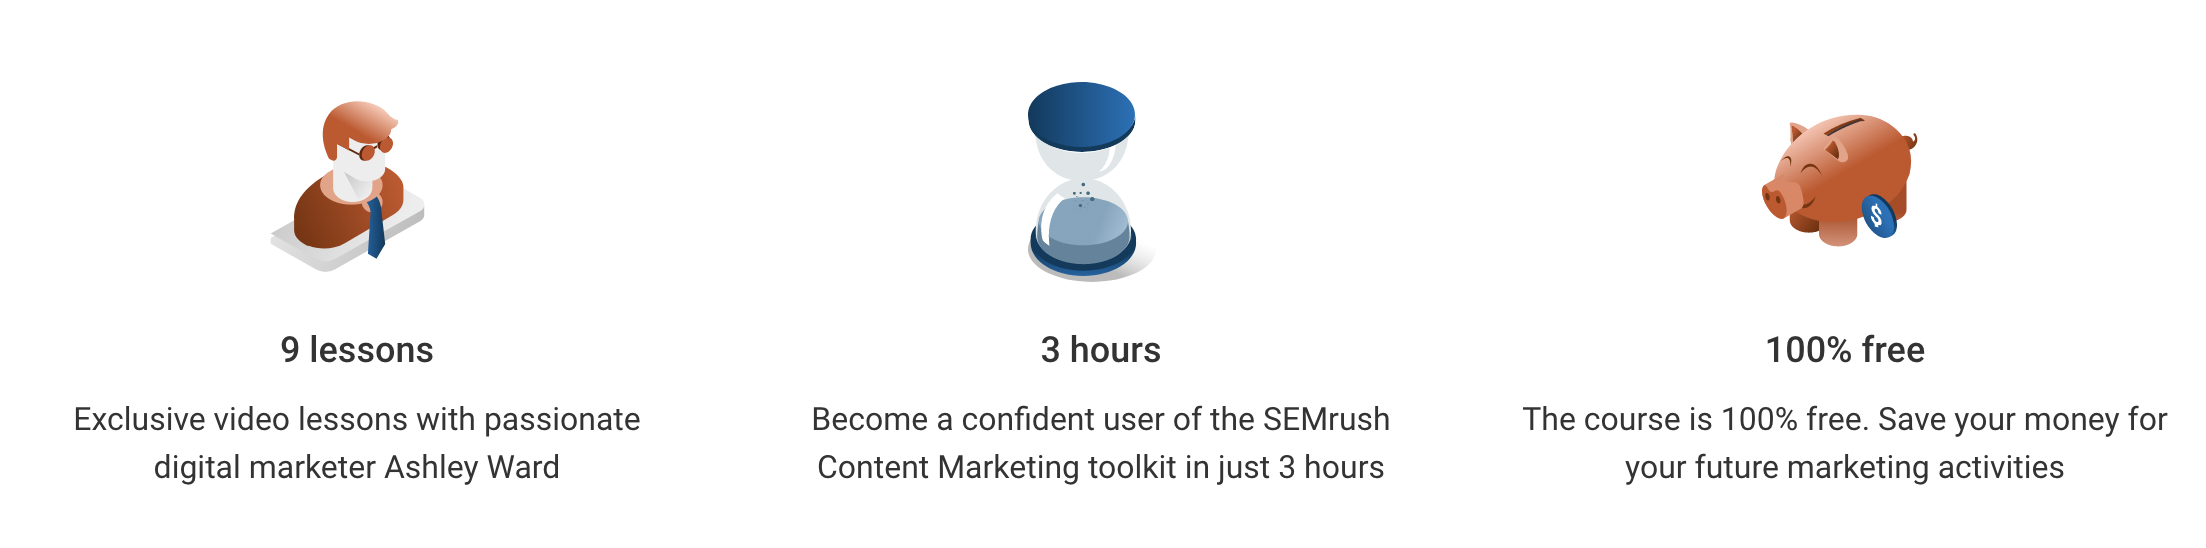  FREE online course SEMrush Content Marketing Toolkit Course